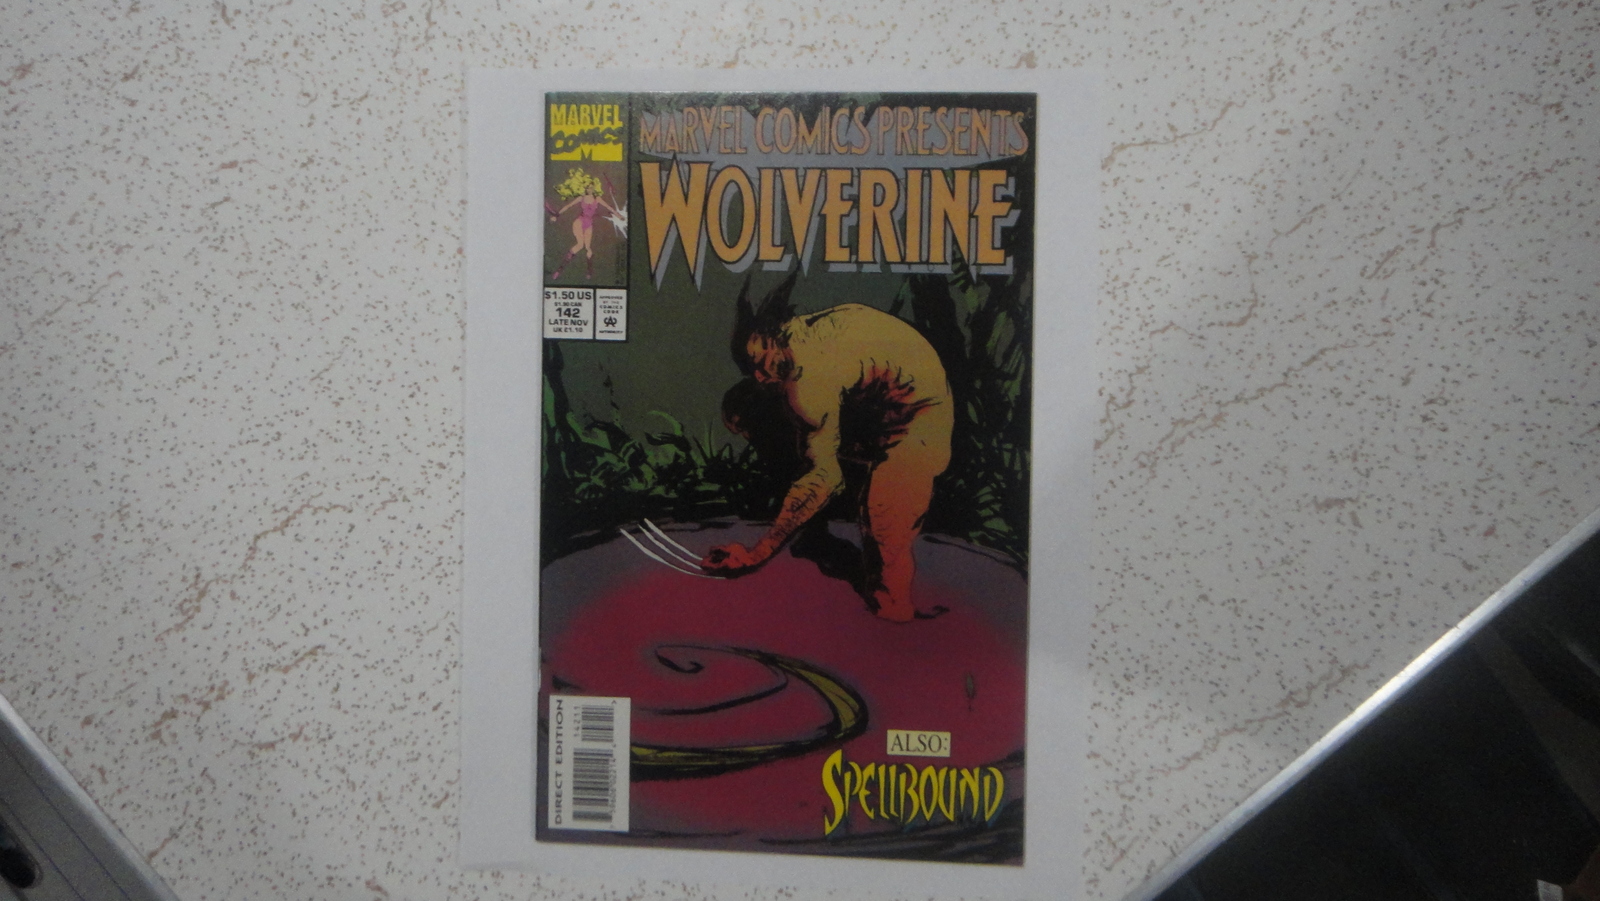 Primary image for Marvel Comics Presents Wolverine + Spellbound/Ghost Rider + Foreigner #142. LooK